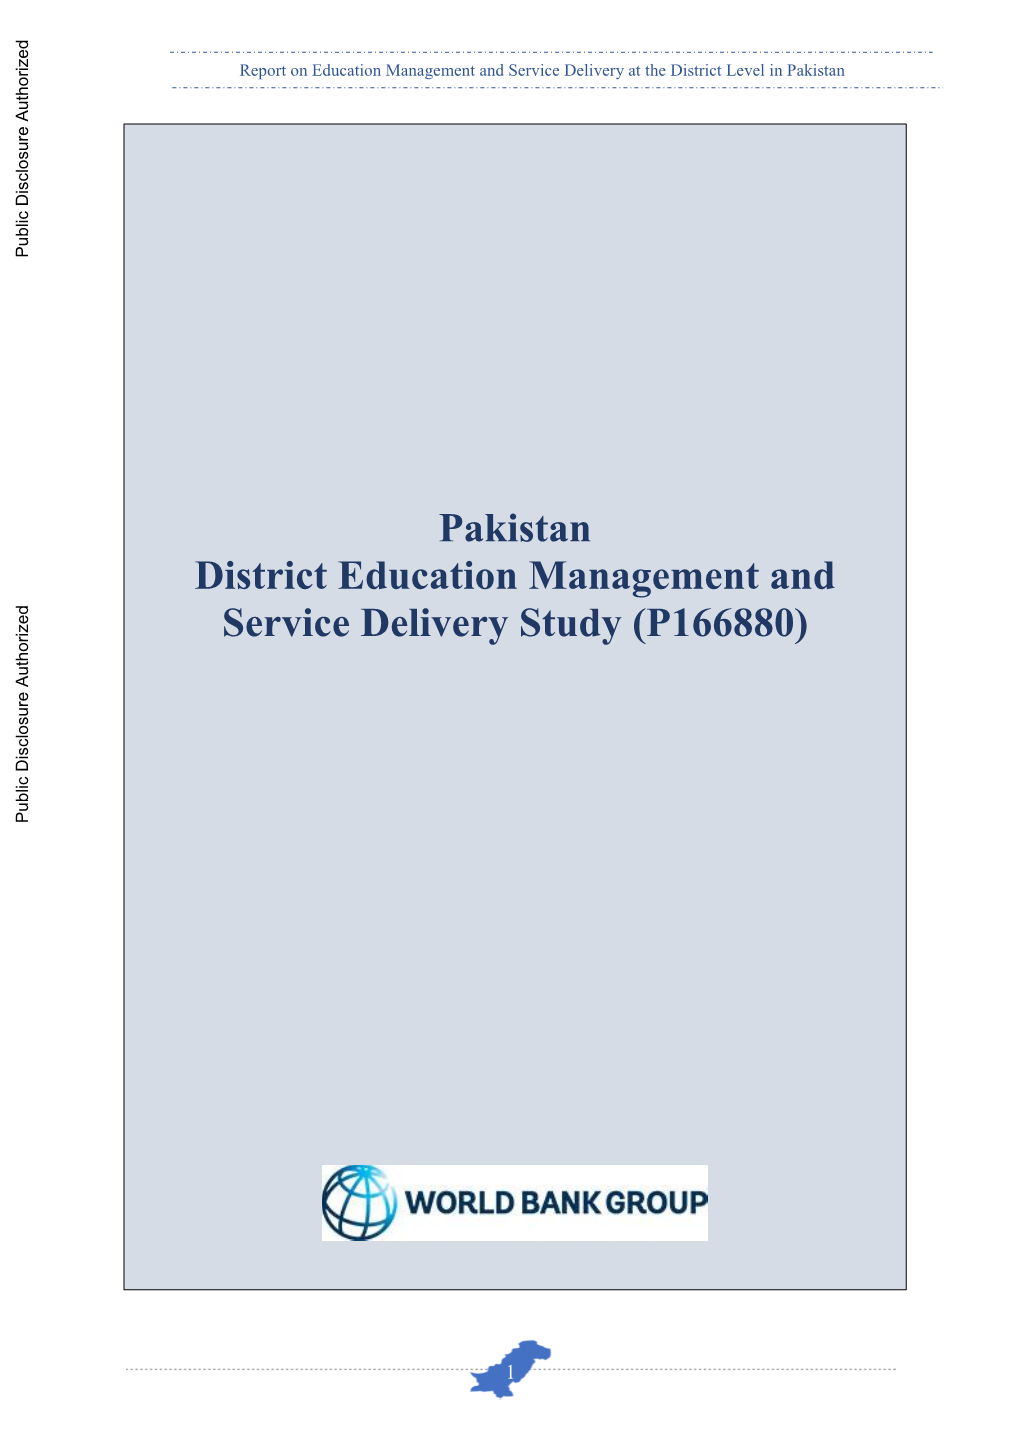 Pakistan District Education Management and Service Delivery Study (P166880)